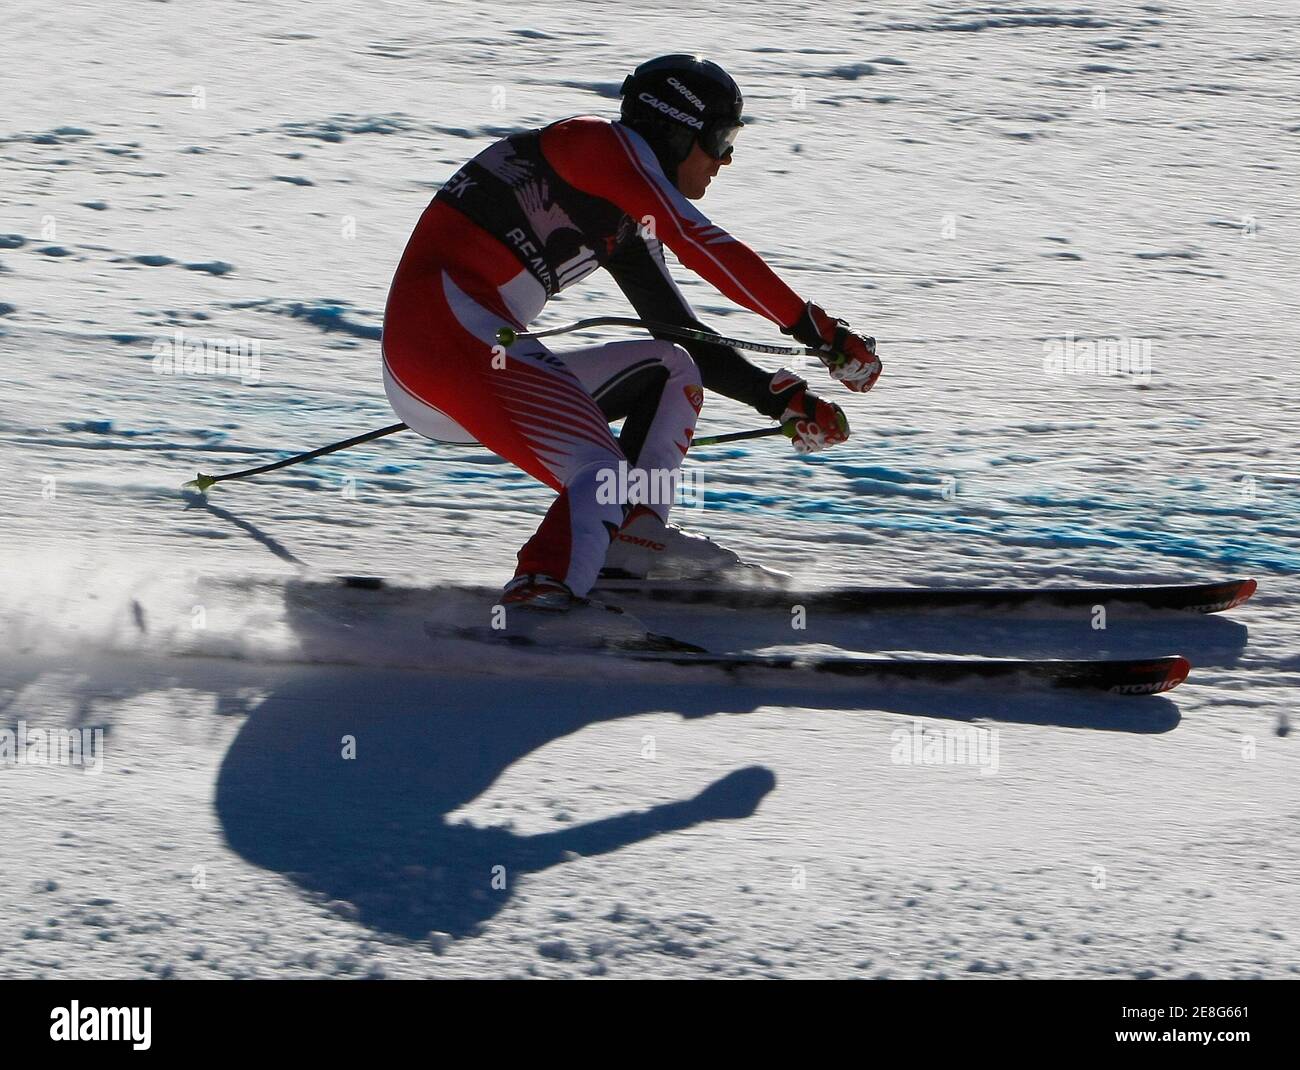 Michael Walchhofer of Austria skis to the fourth best time in the first training for the men's World Cup downhill ski race in Beaver Creek, Colorado December 2, 2008. REUTERS/Rick Wilking (UNITED STATES) Stock Photo